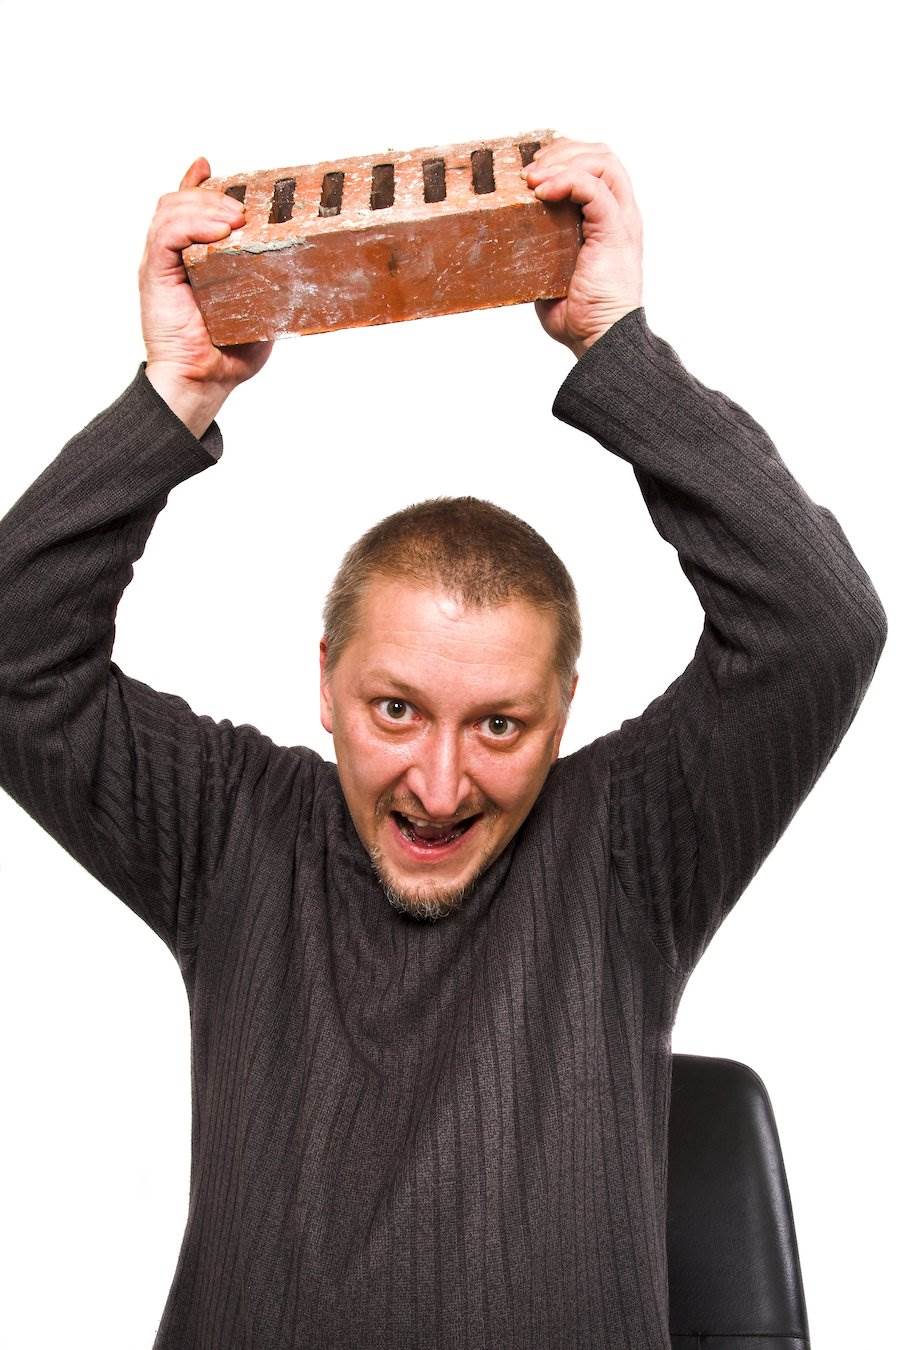 Man holding up brick about to strike